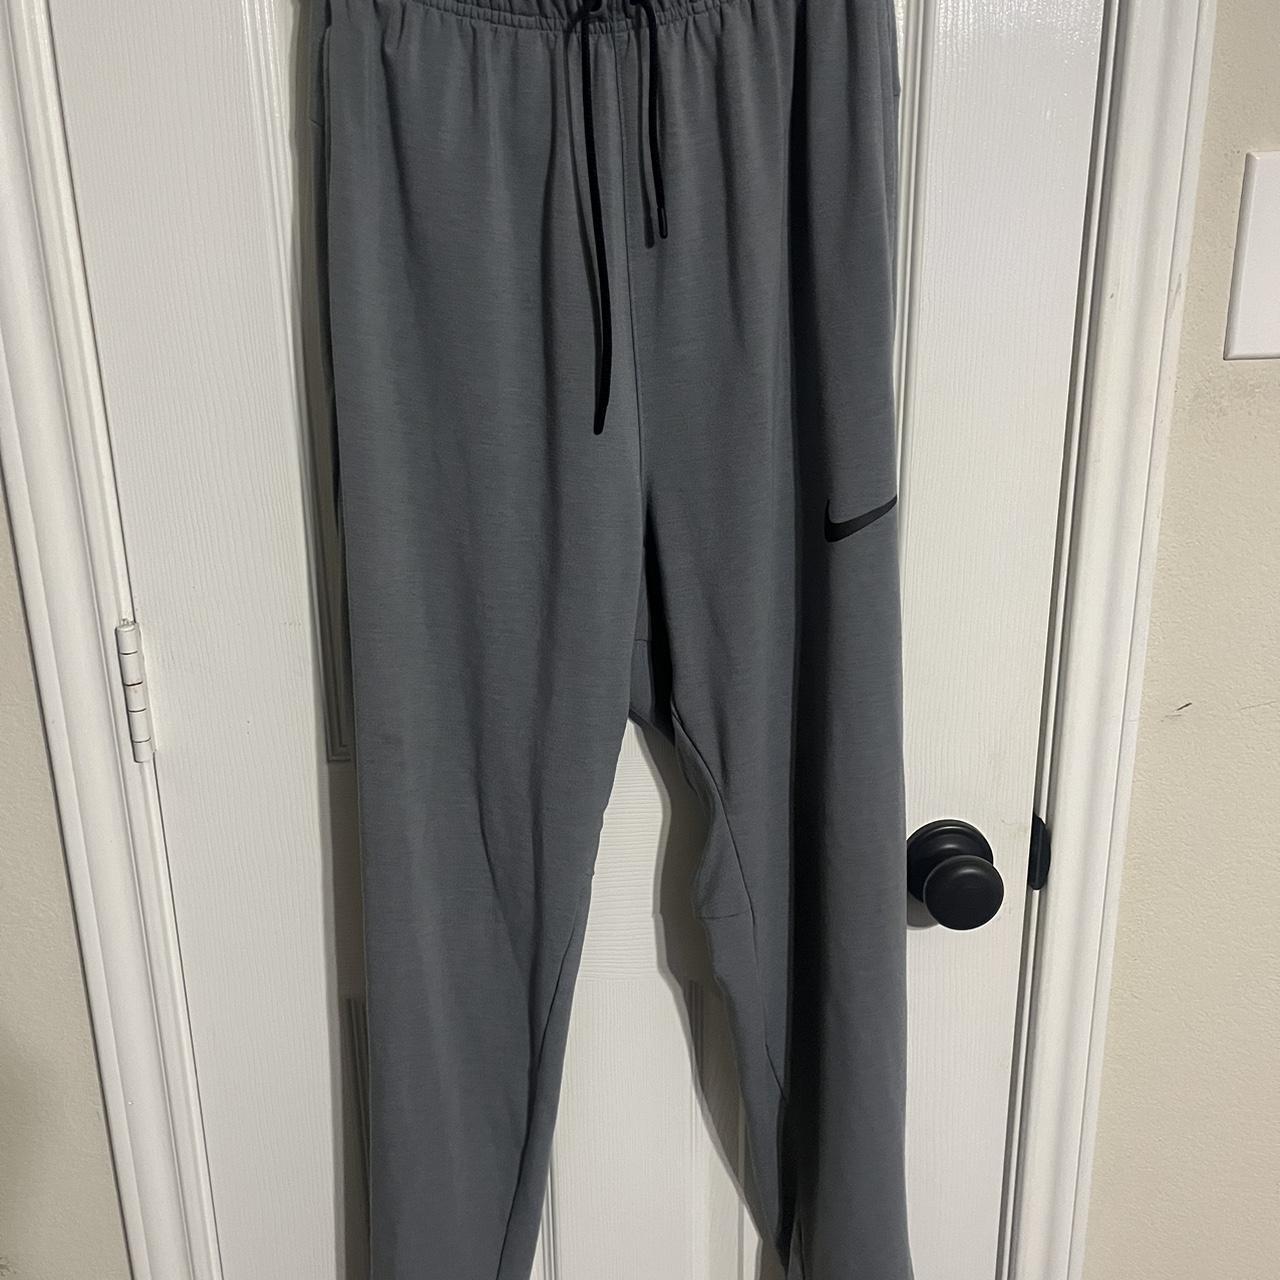 Grey Nike sweatpants in good condition with no signs... - Depop